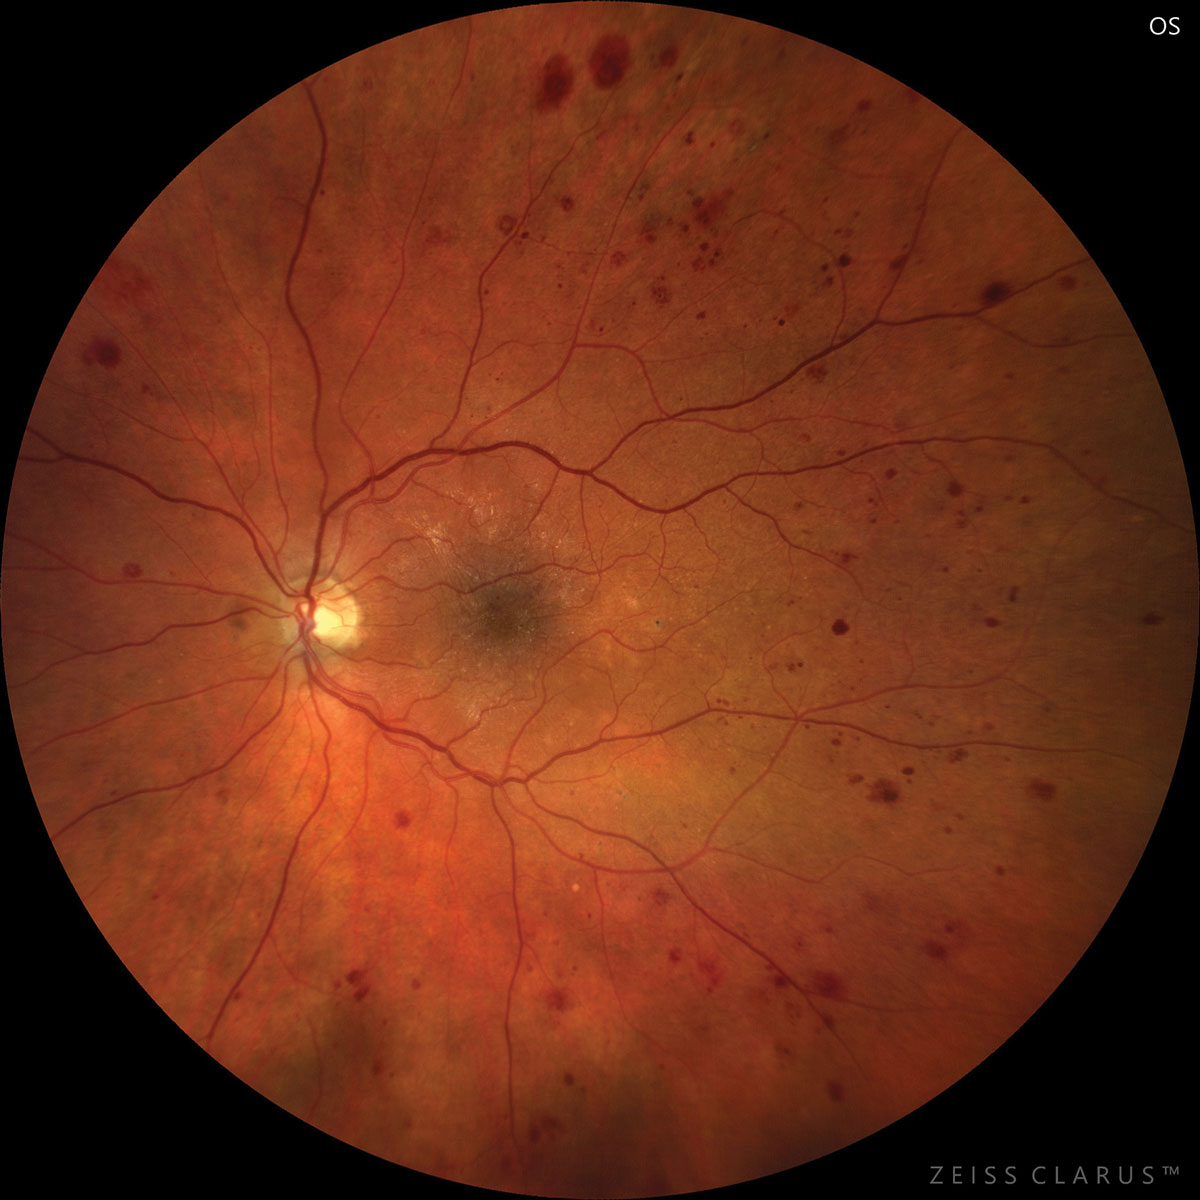 Improvement in microaneurysms is one clinical indicator of successful response to therapy for diabetic retinopathy, the study found.